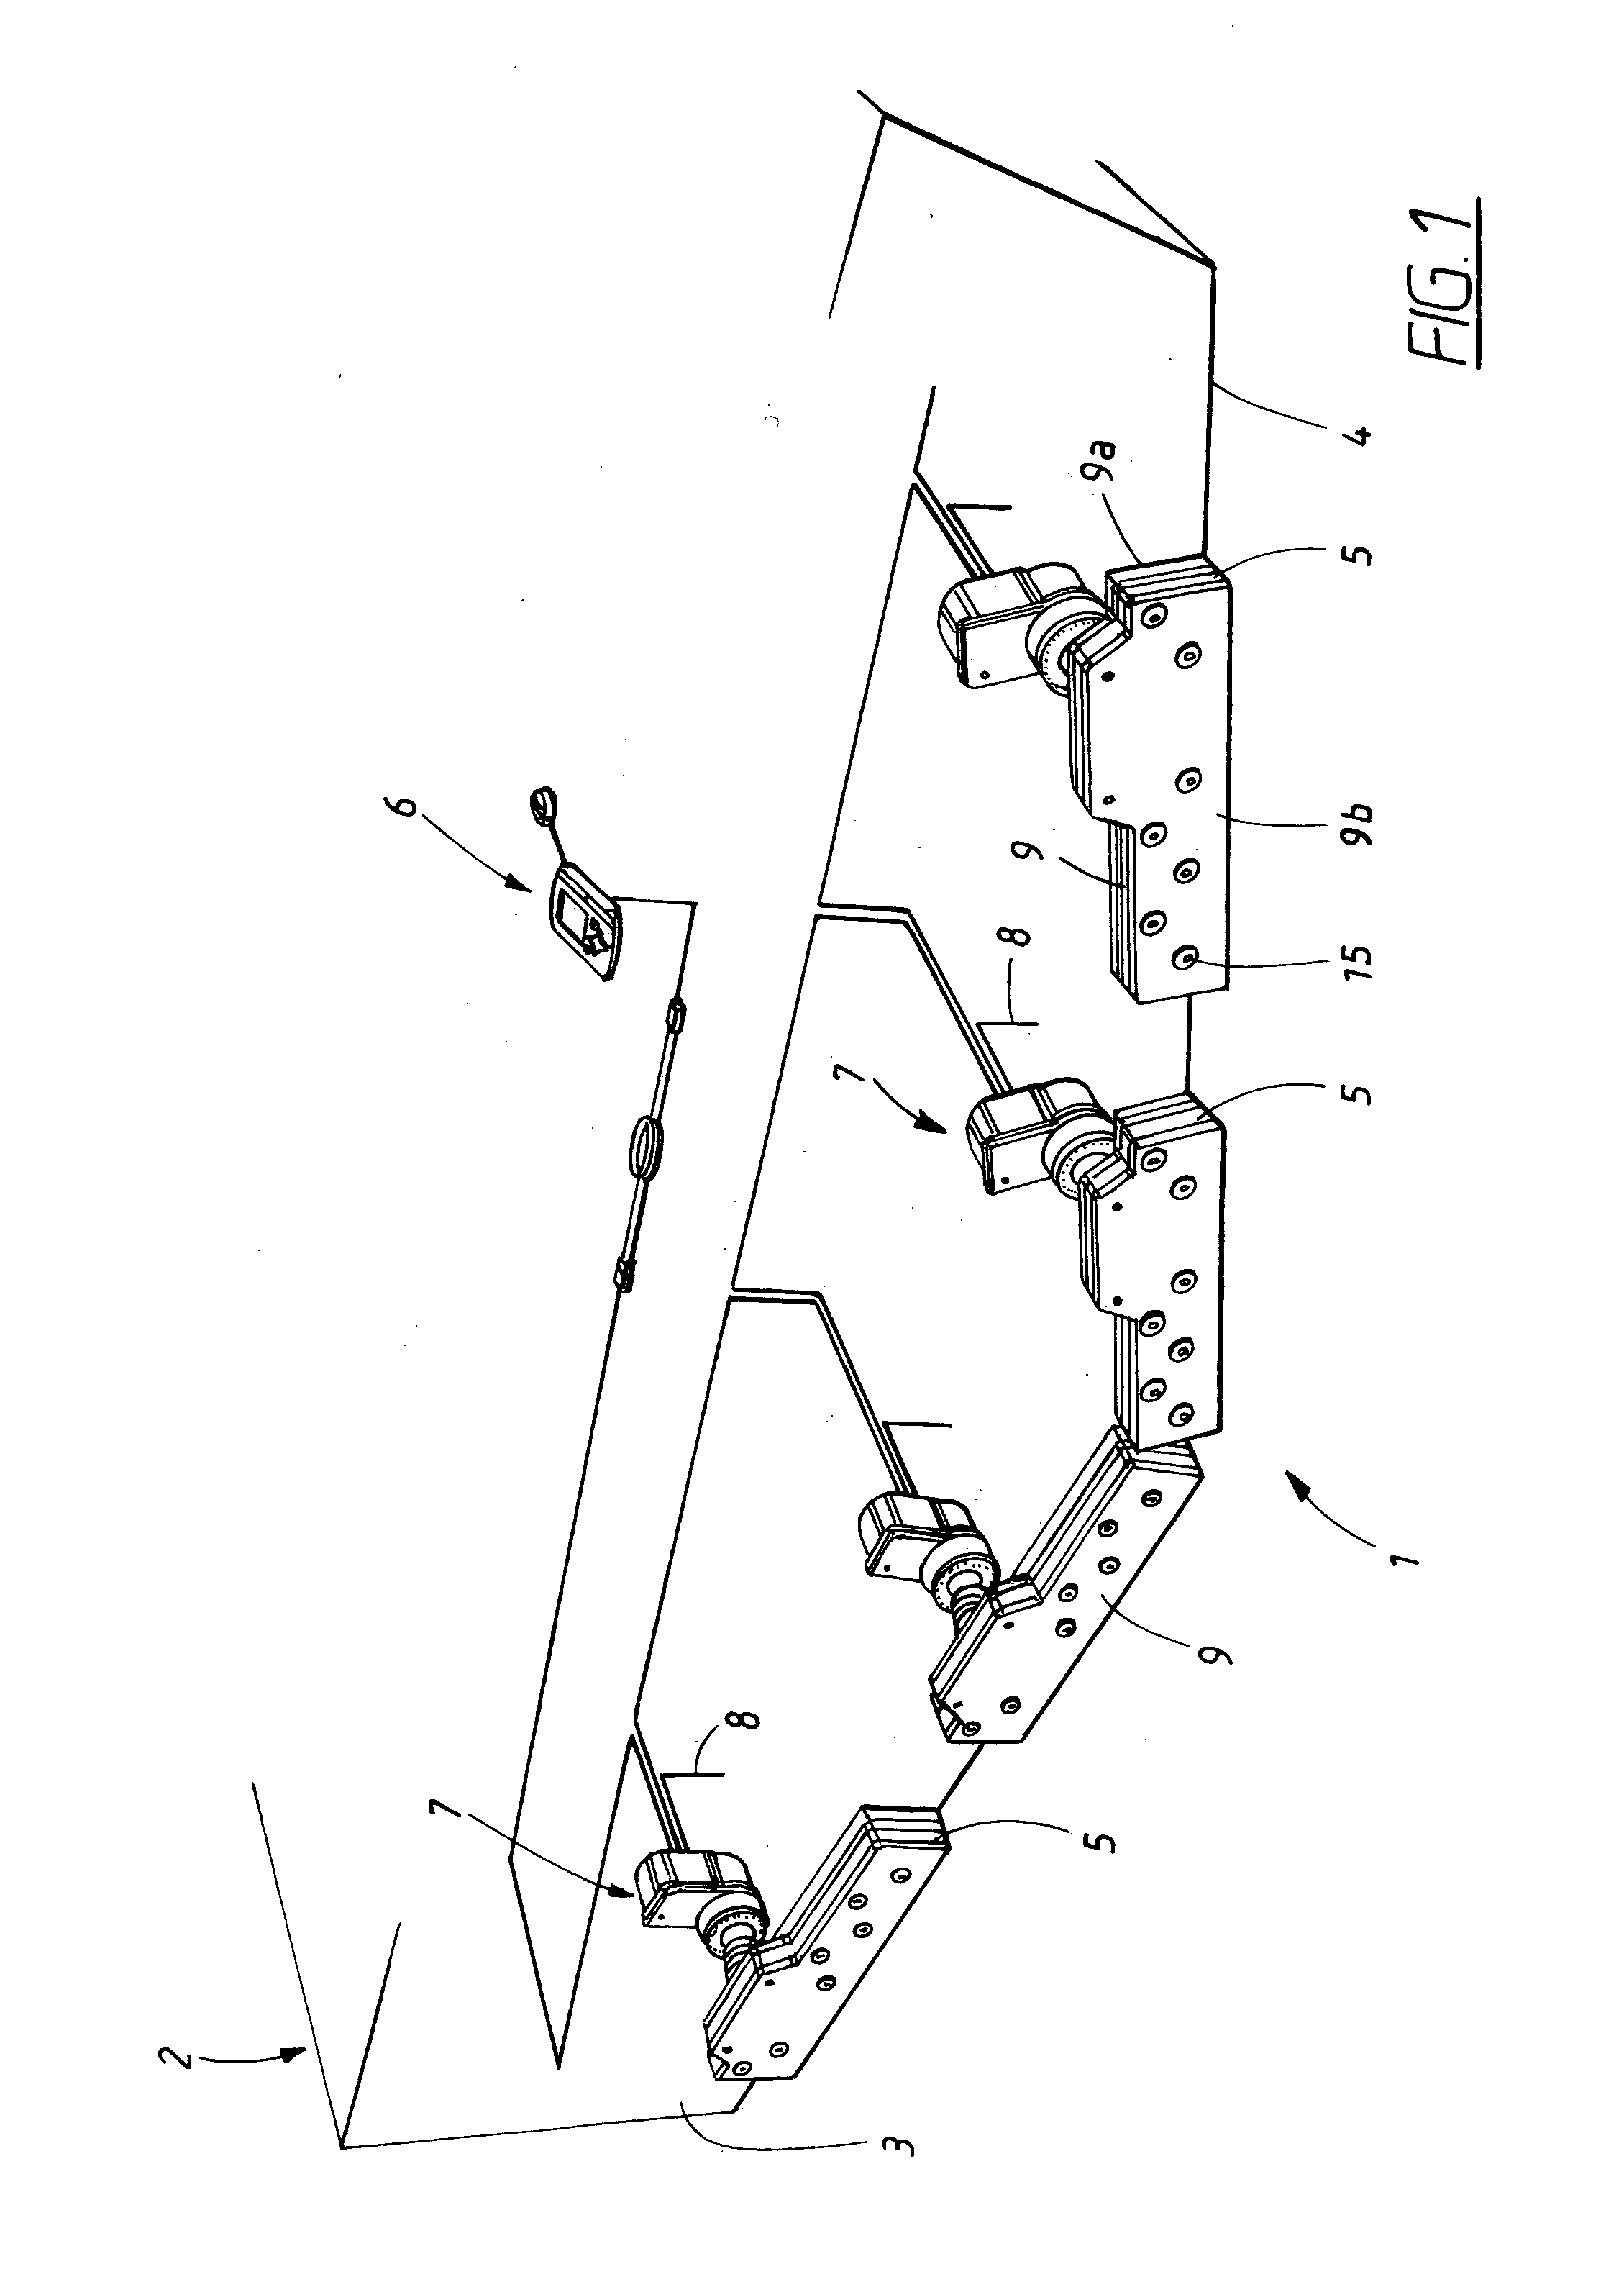 Arrangement for dynamic control of running trim and list of a boat